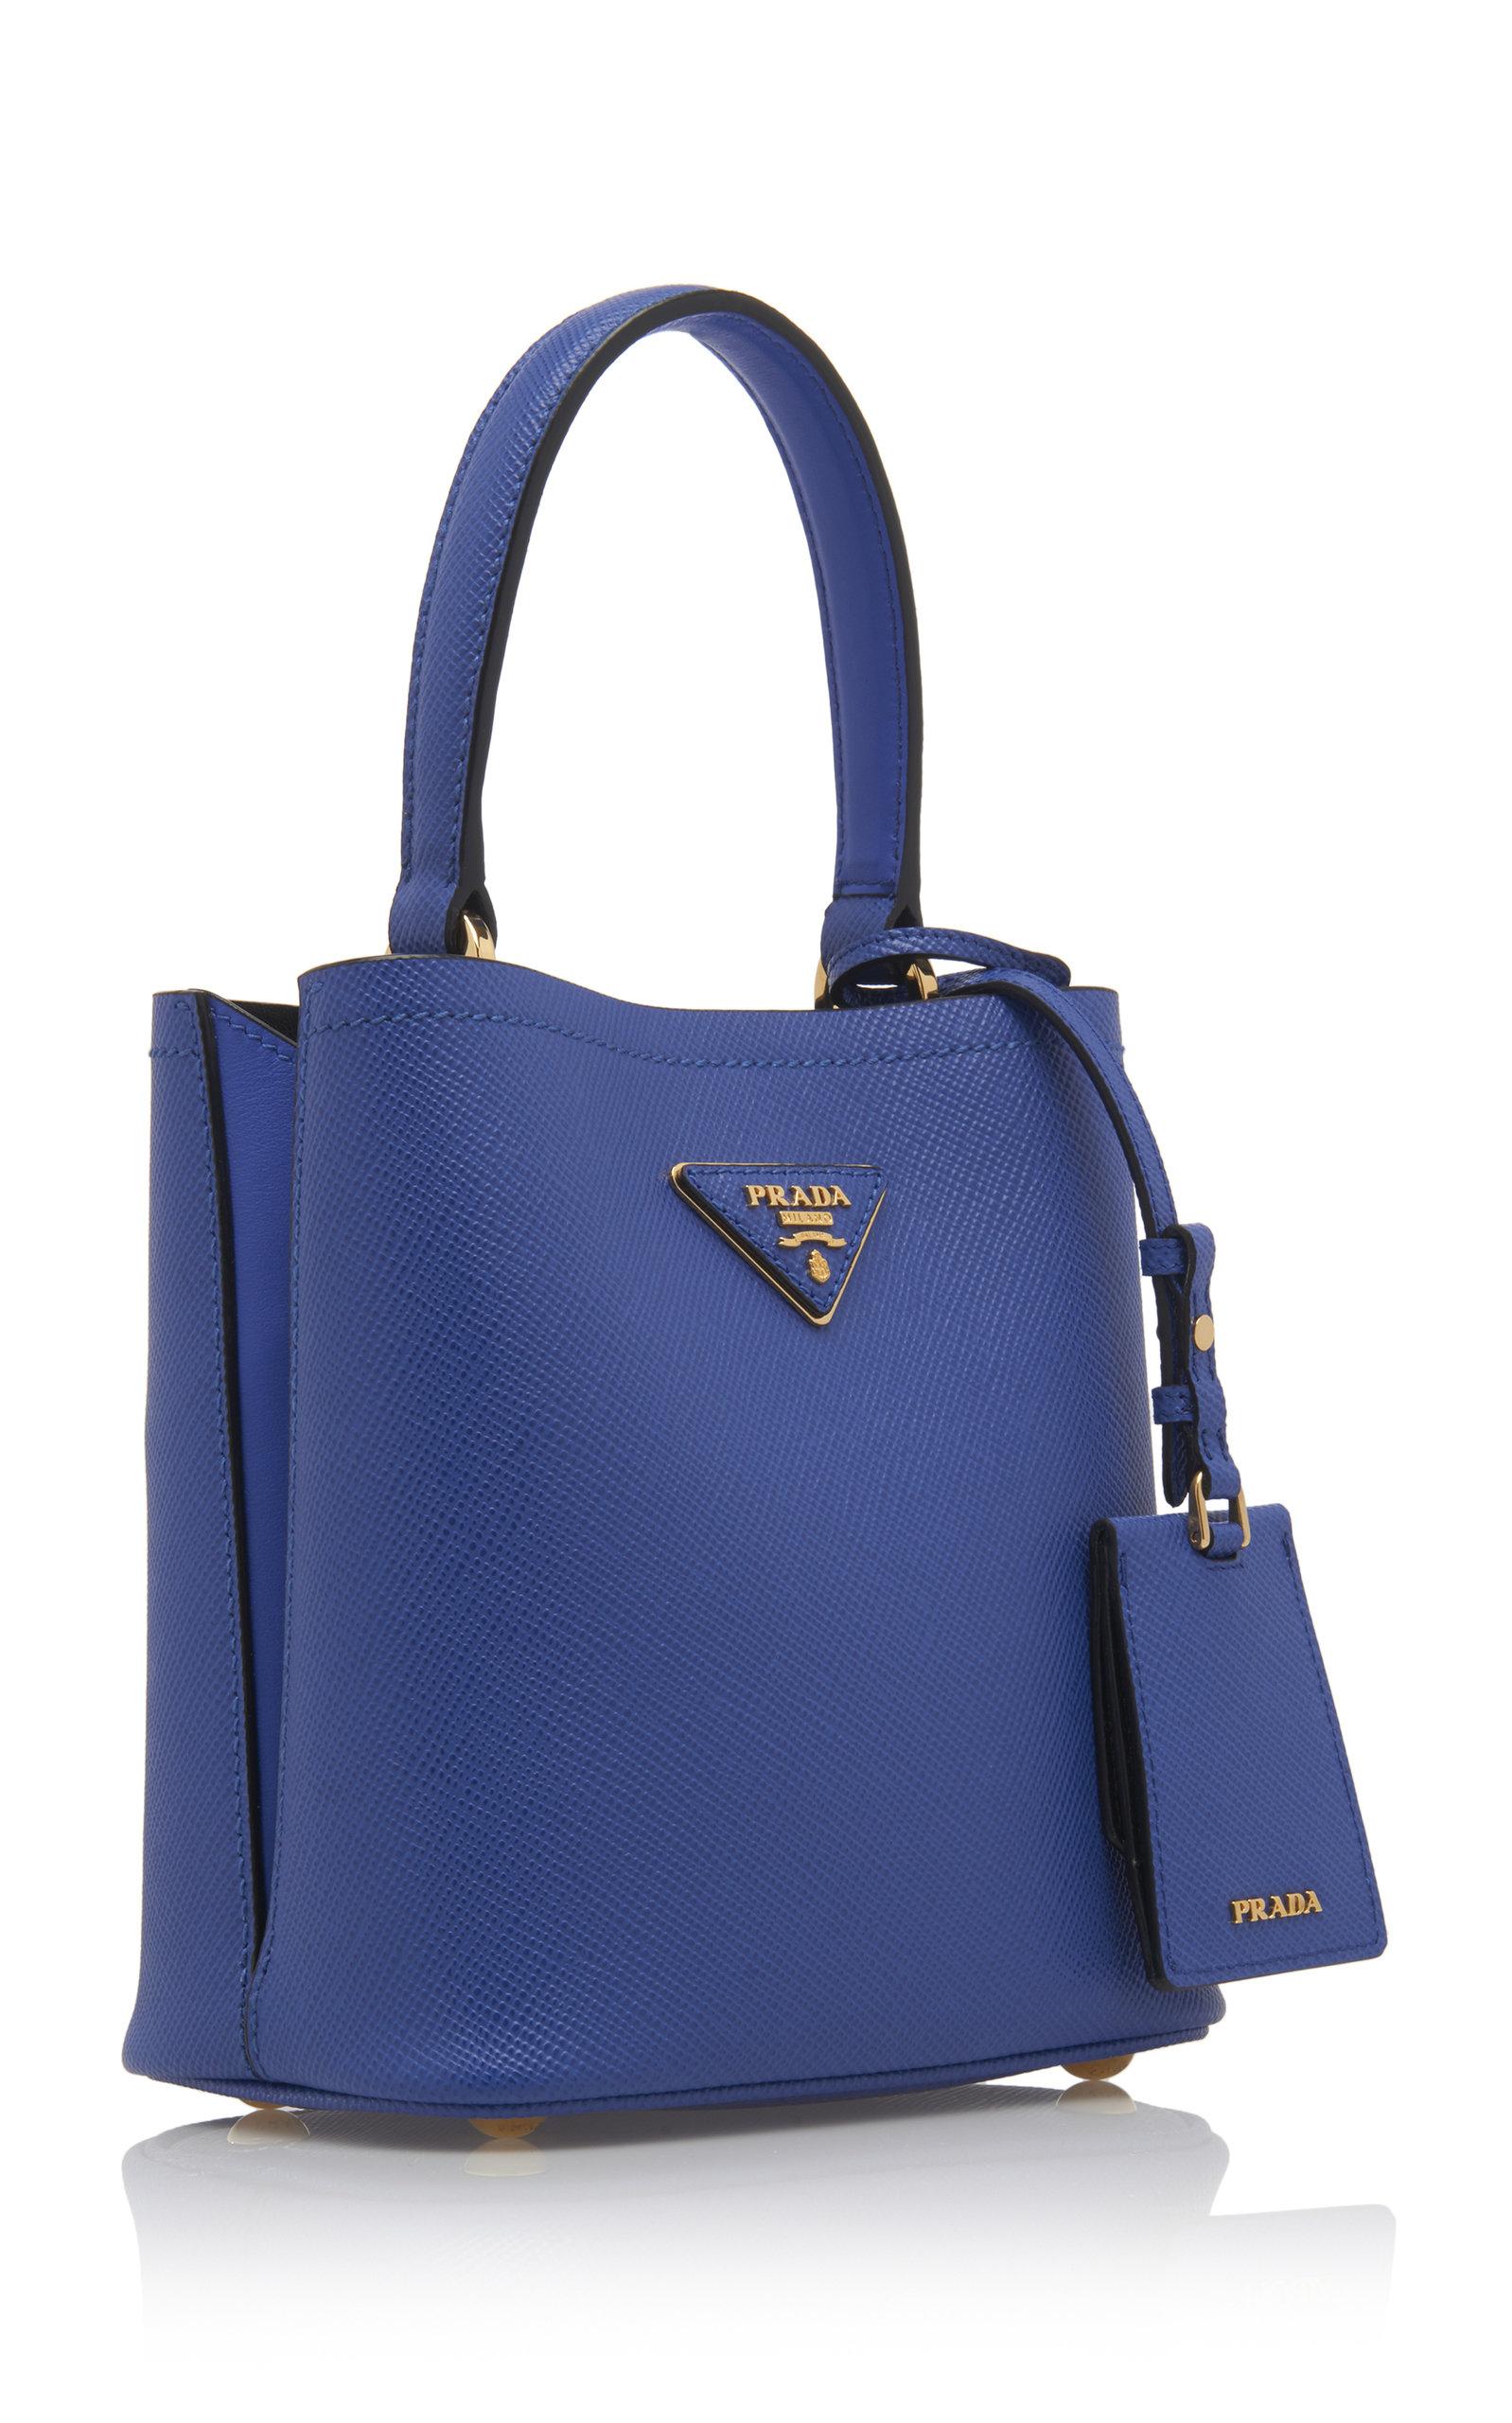 Prada Small Saffiano Leather Double Bucket Bag in Blue | Lyst